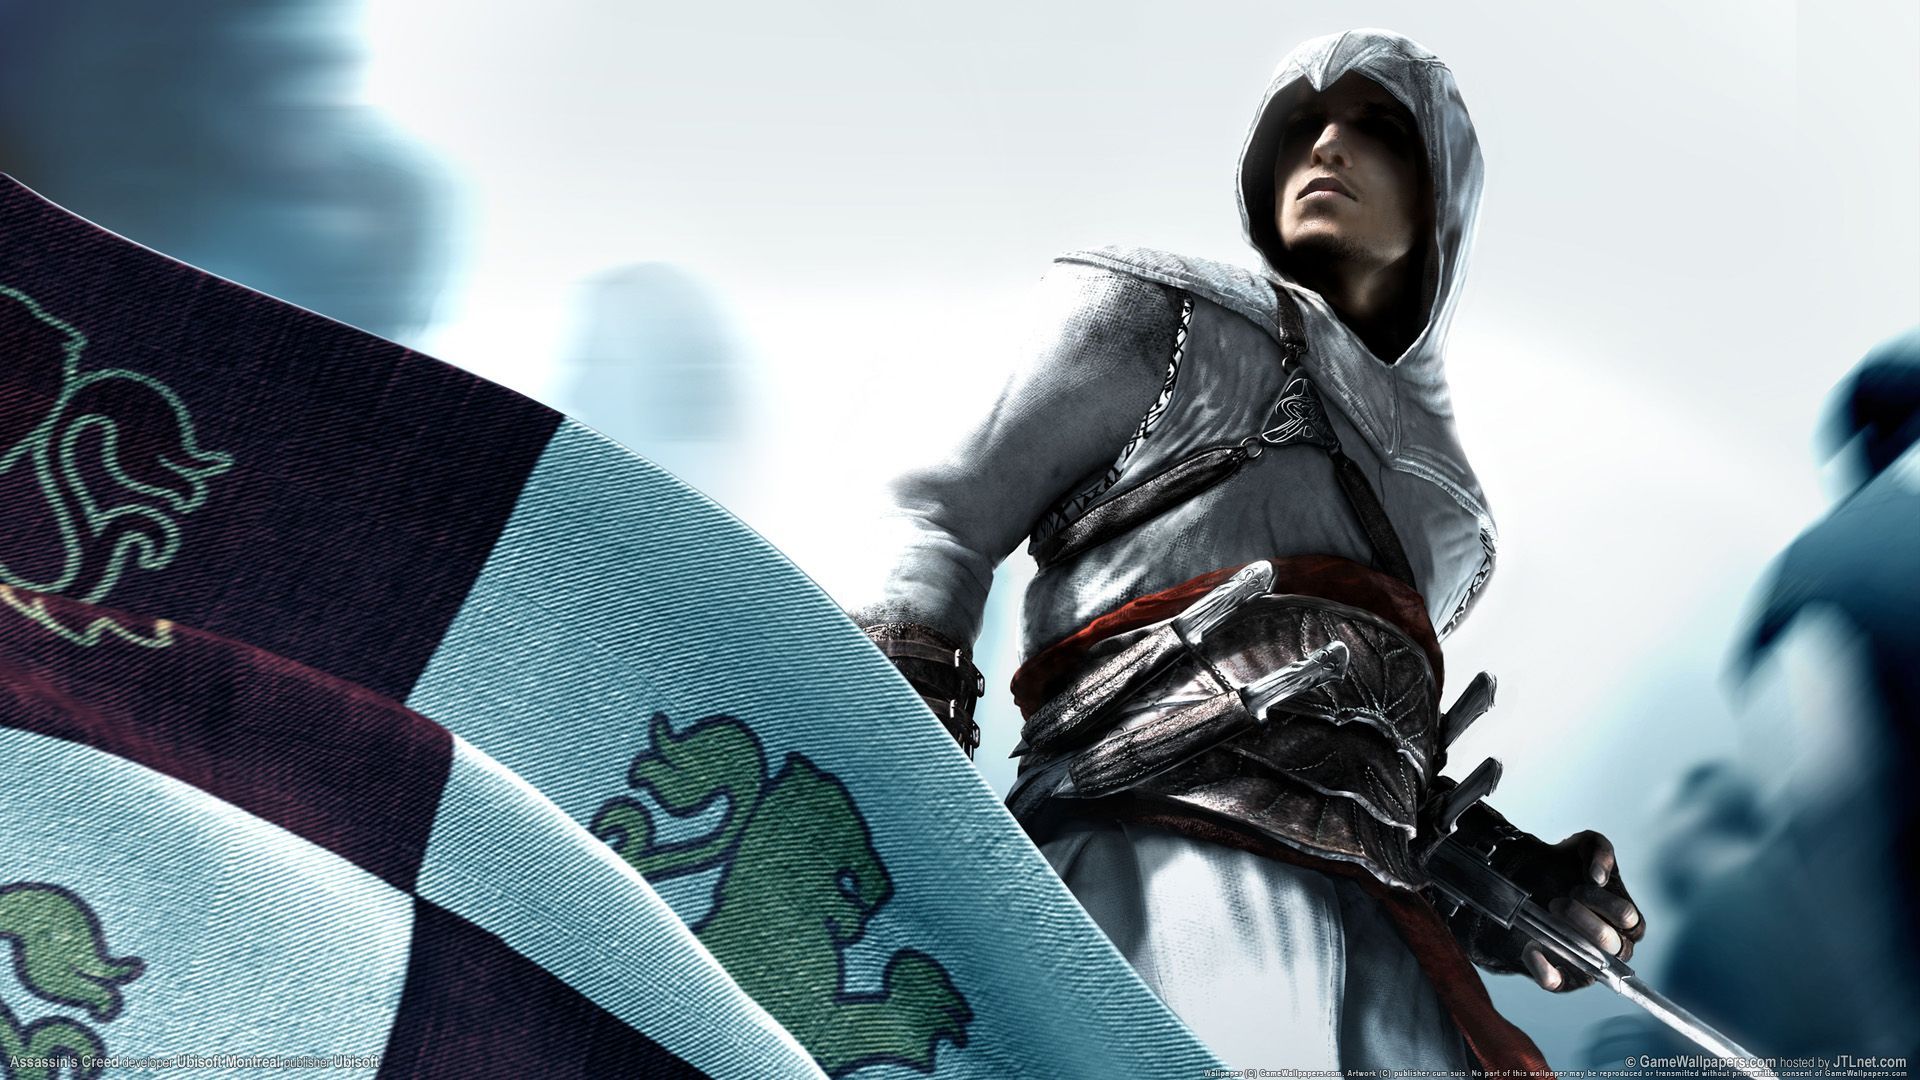 Assassins Creed 1080p Wallpapers | HD Wallpapers